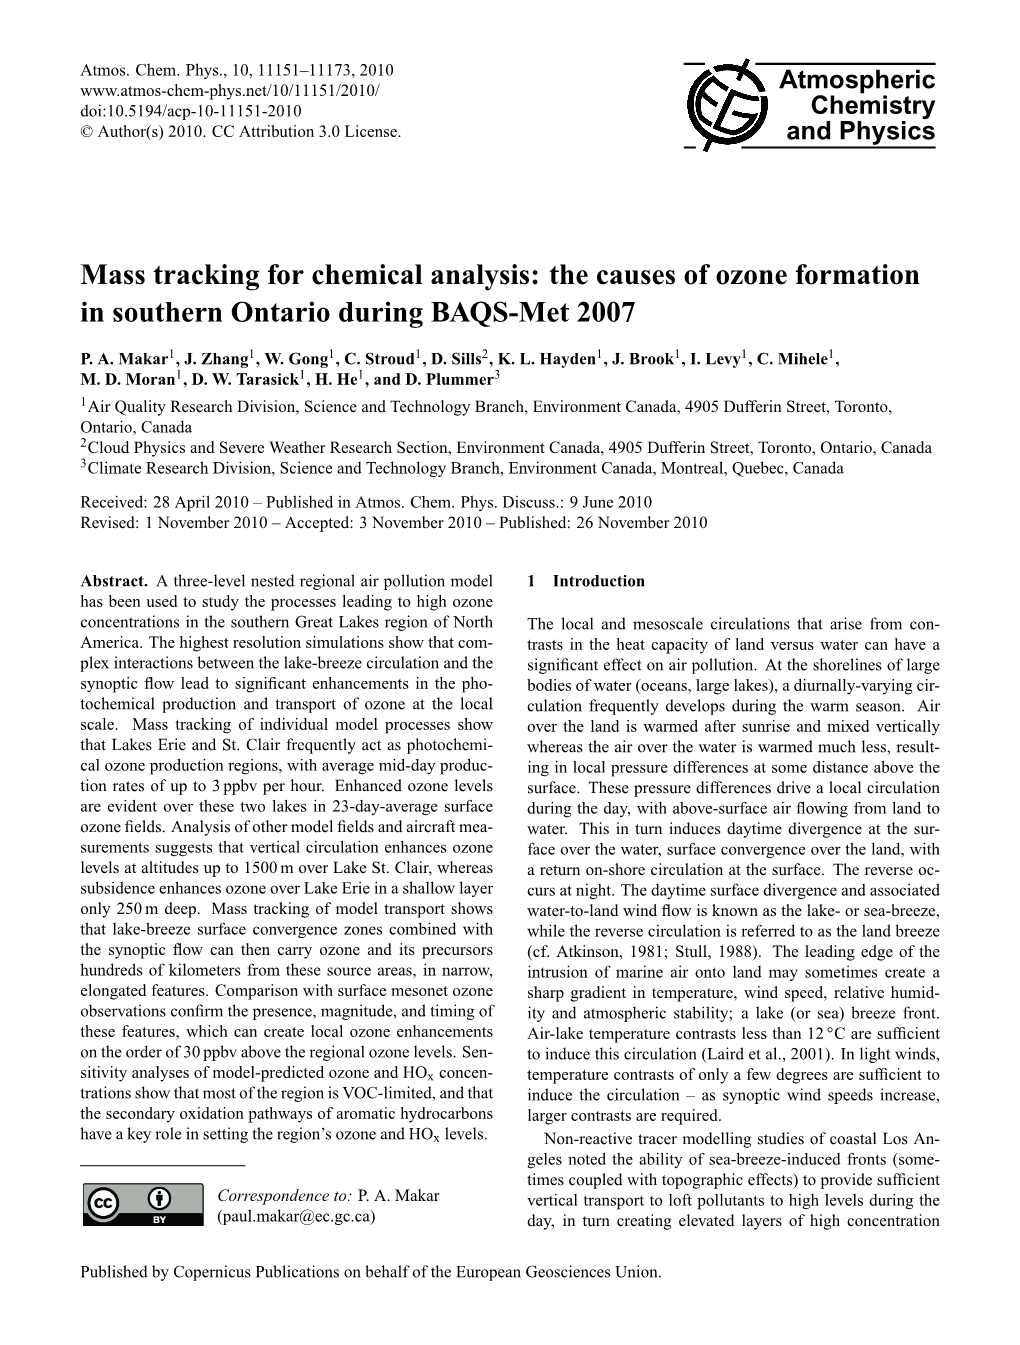 Mass Tracking for Chemical Analysis: the Causes of Ozone Formation in Southern Ontario During BAQS-Met 2007